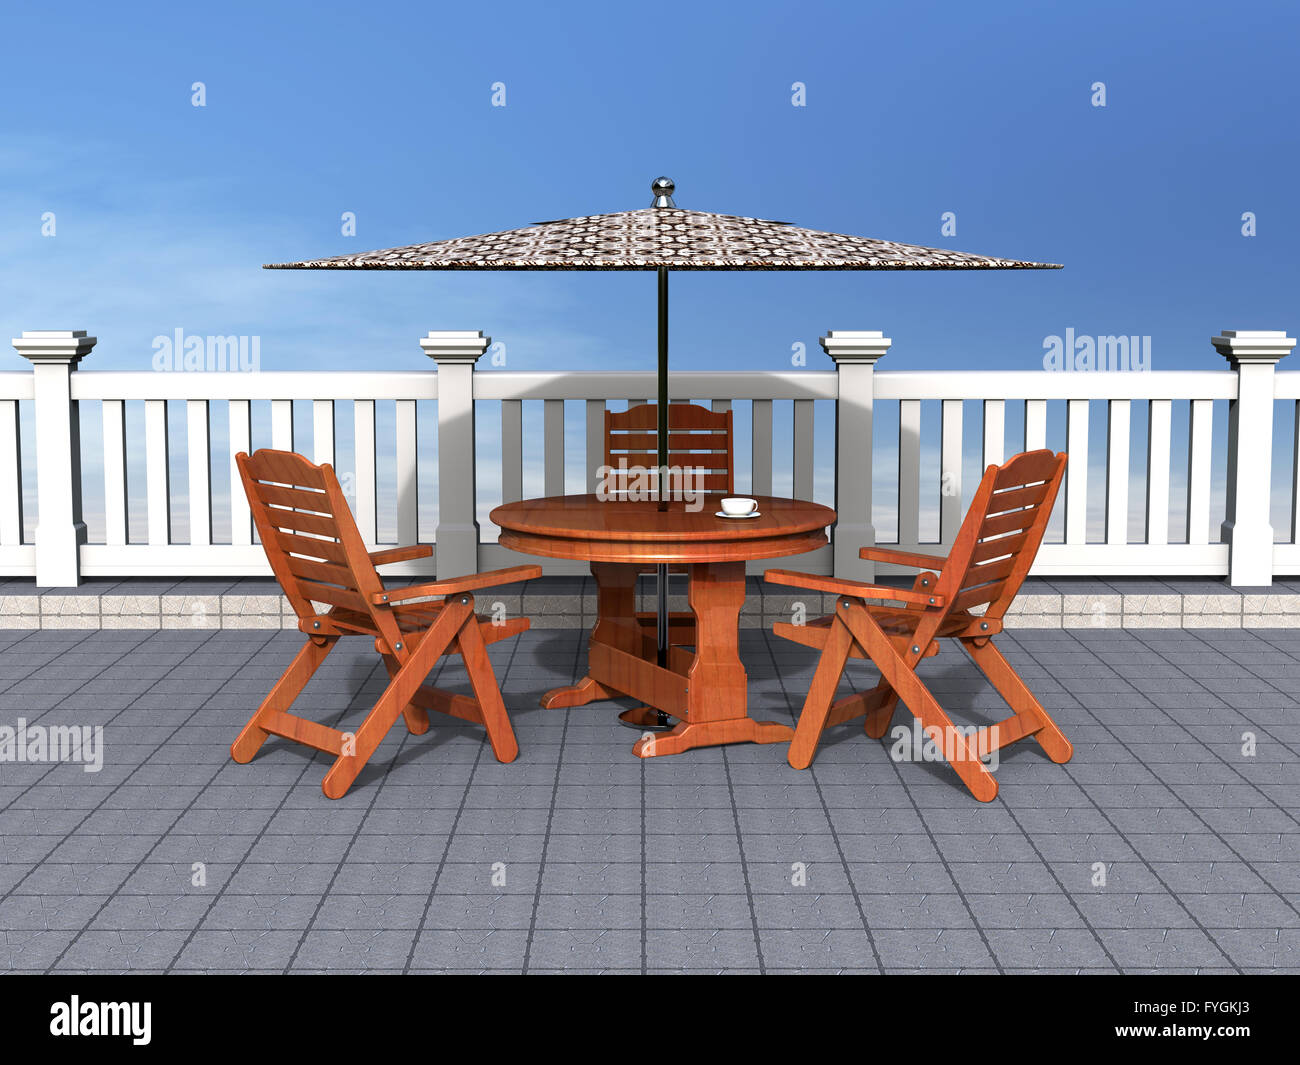 Outdoor patio with chairs and table Stock Photo